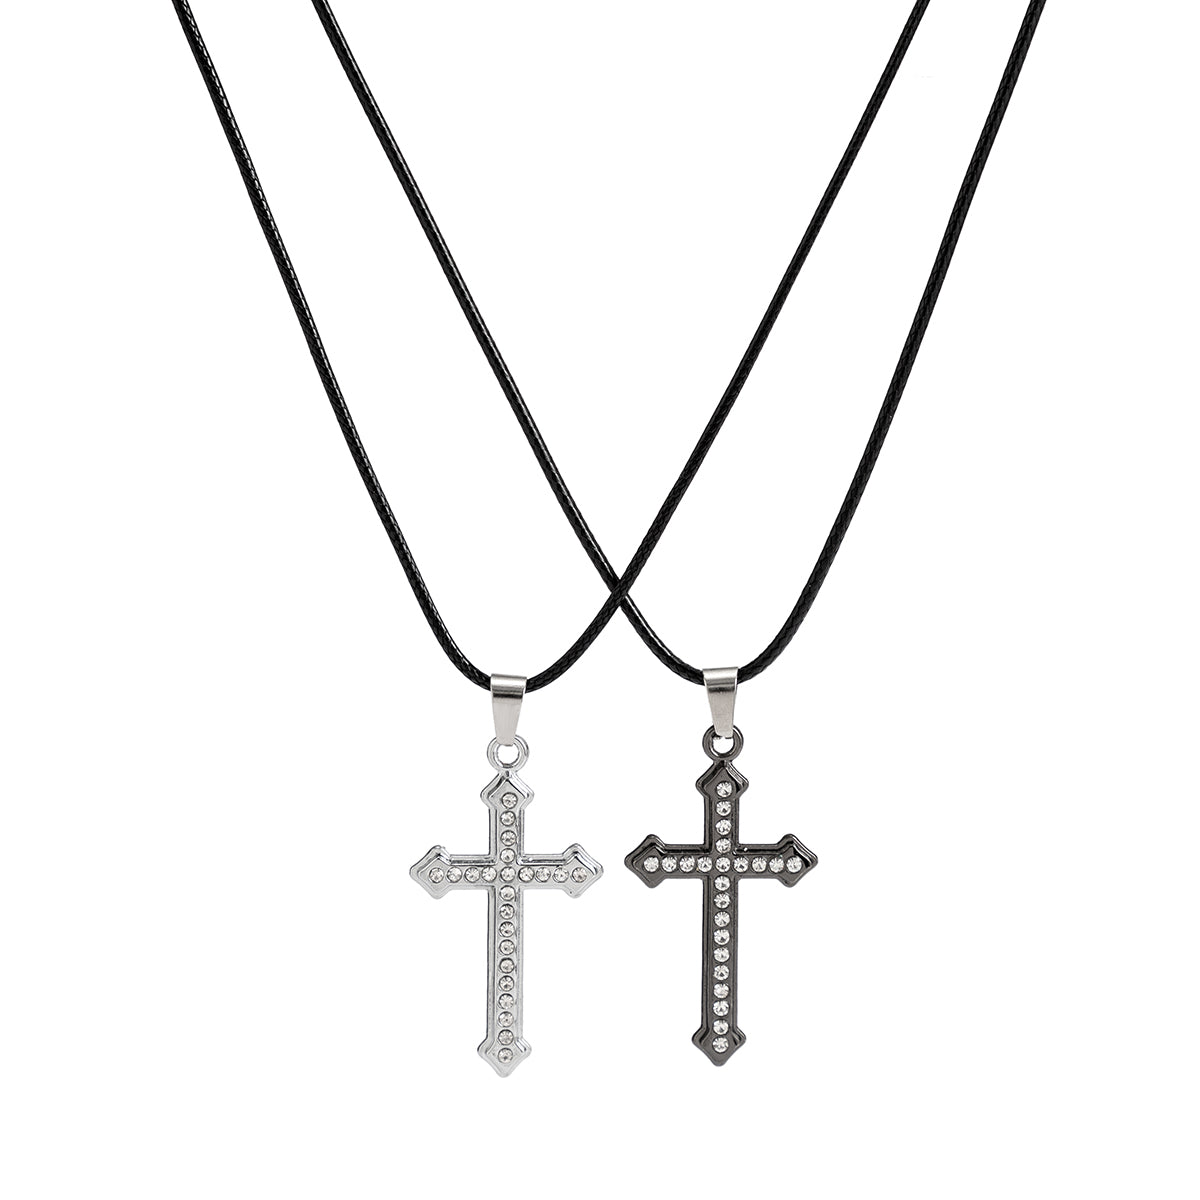 Cubic Zirconia & Silver-Plated Cross Pendant Necklace Set